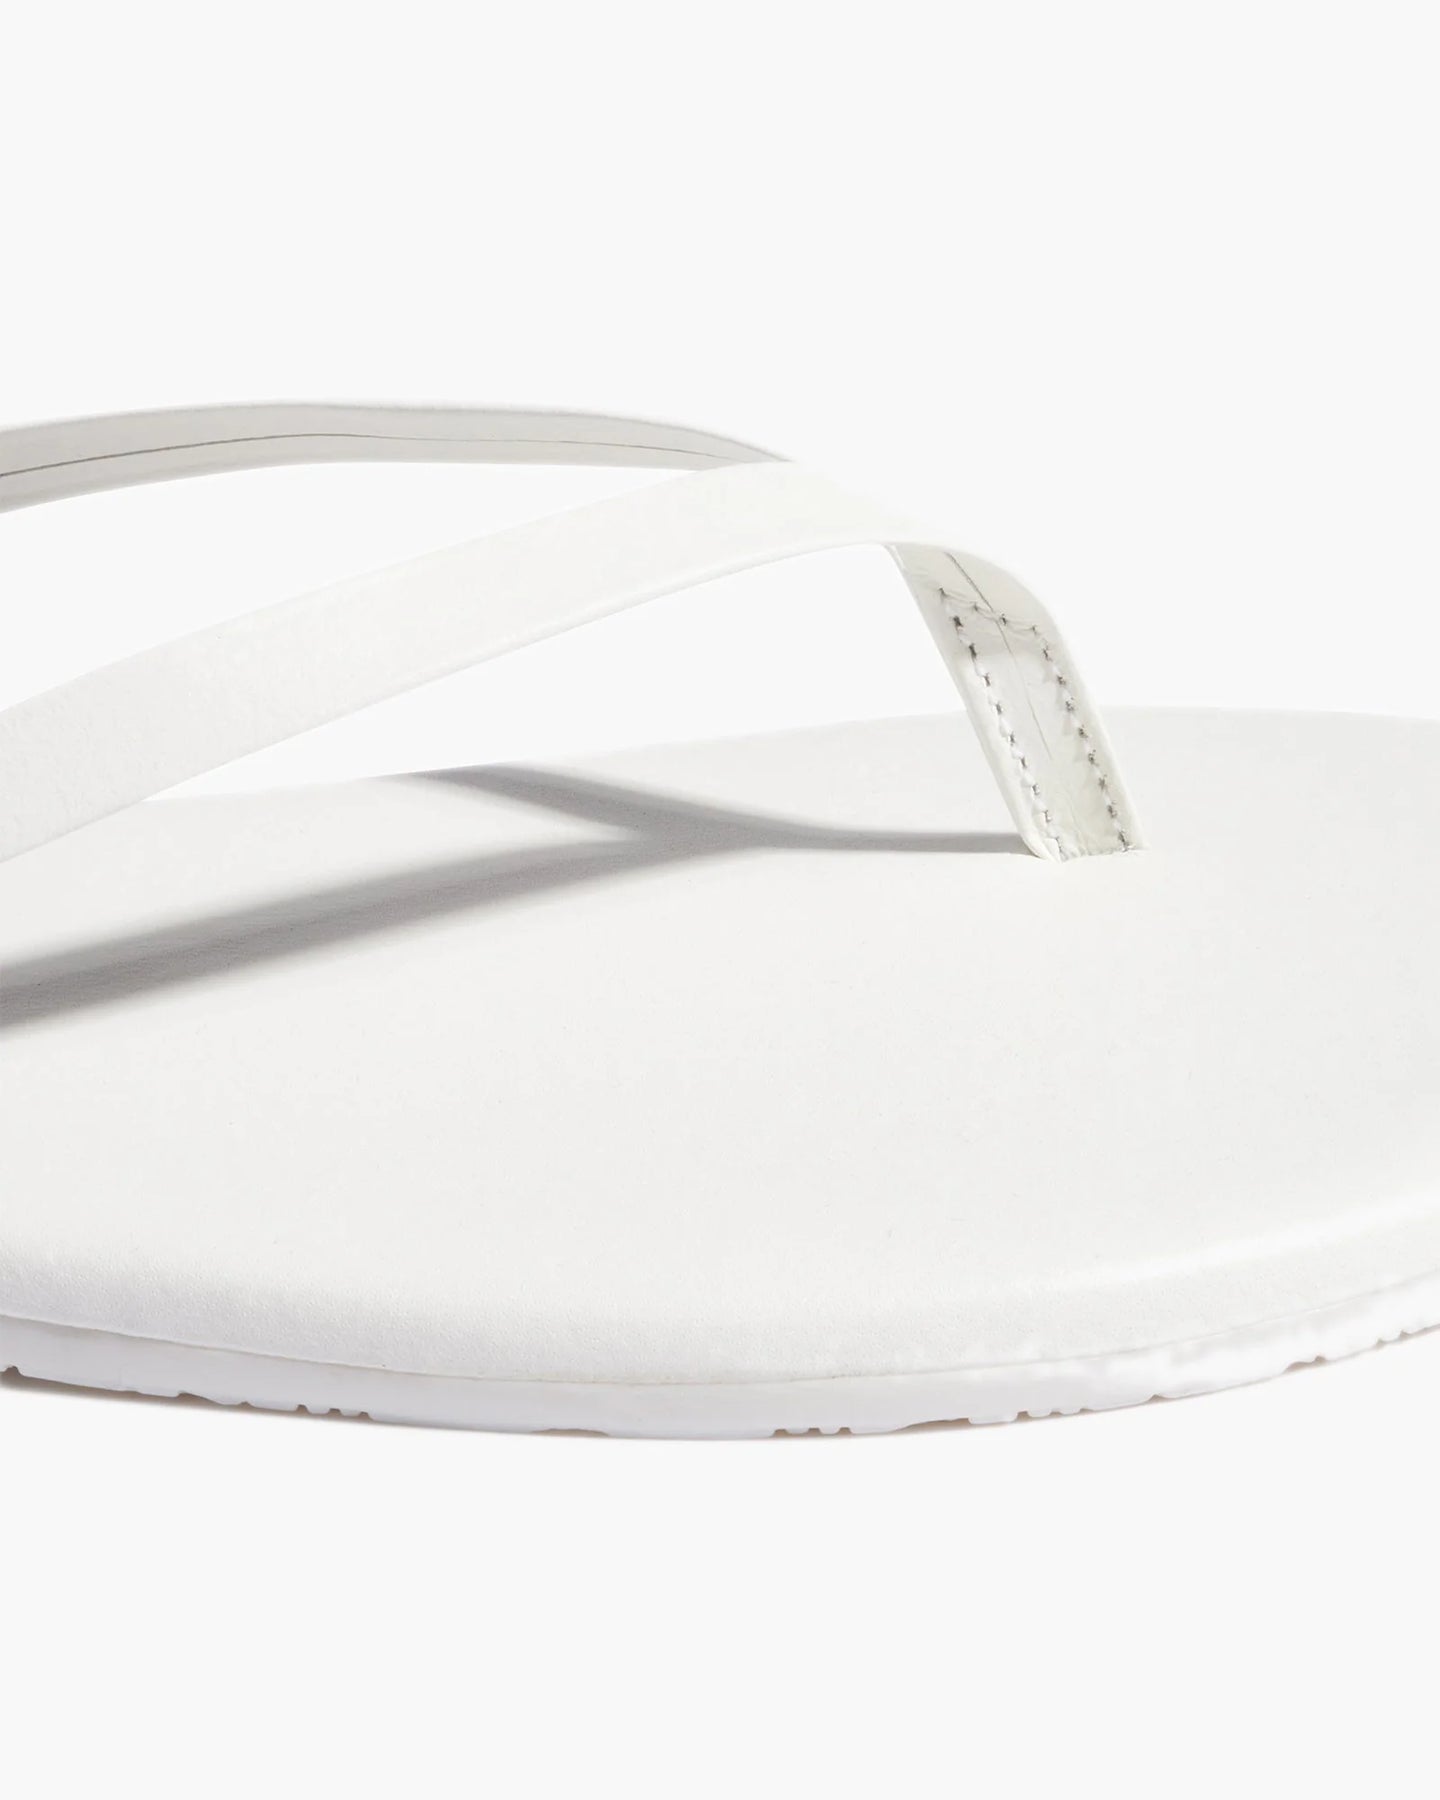 Tkees Flip Flop ☆ White